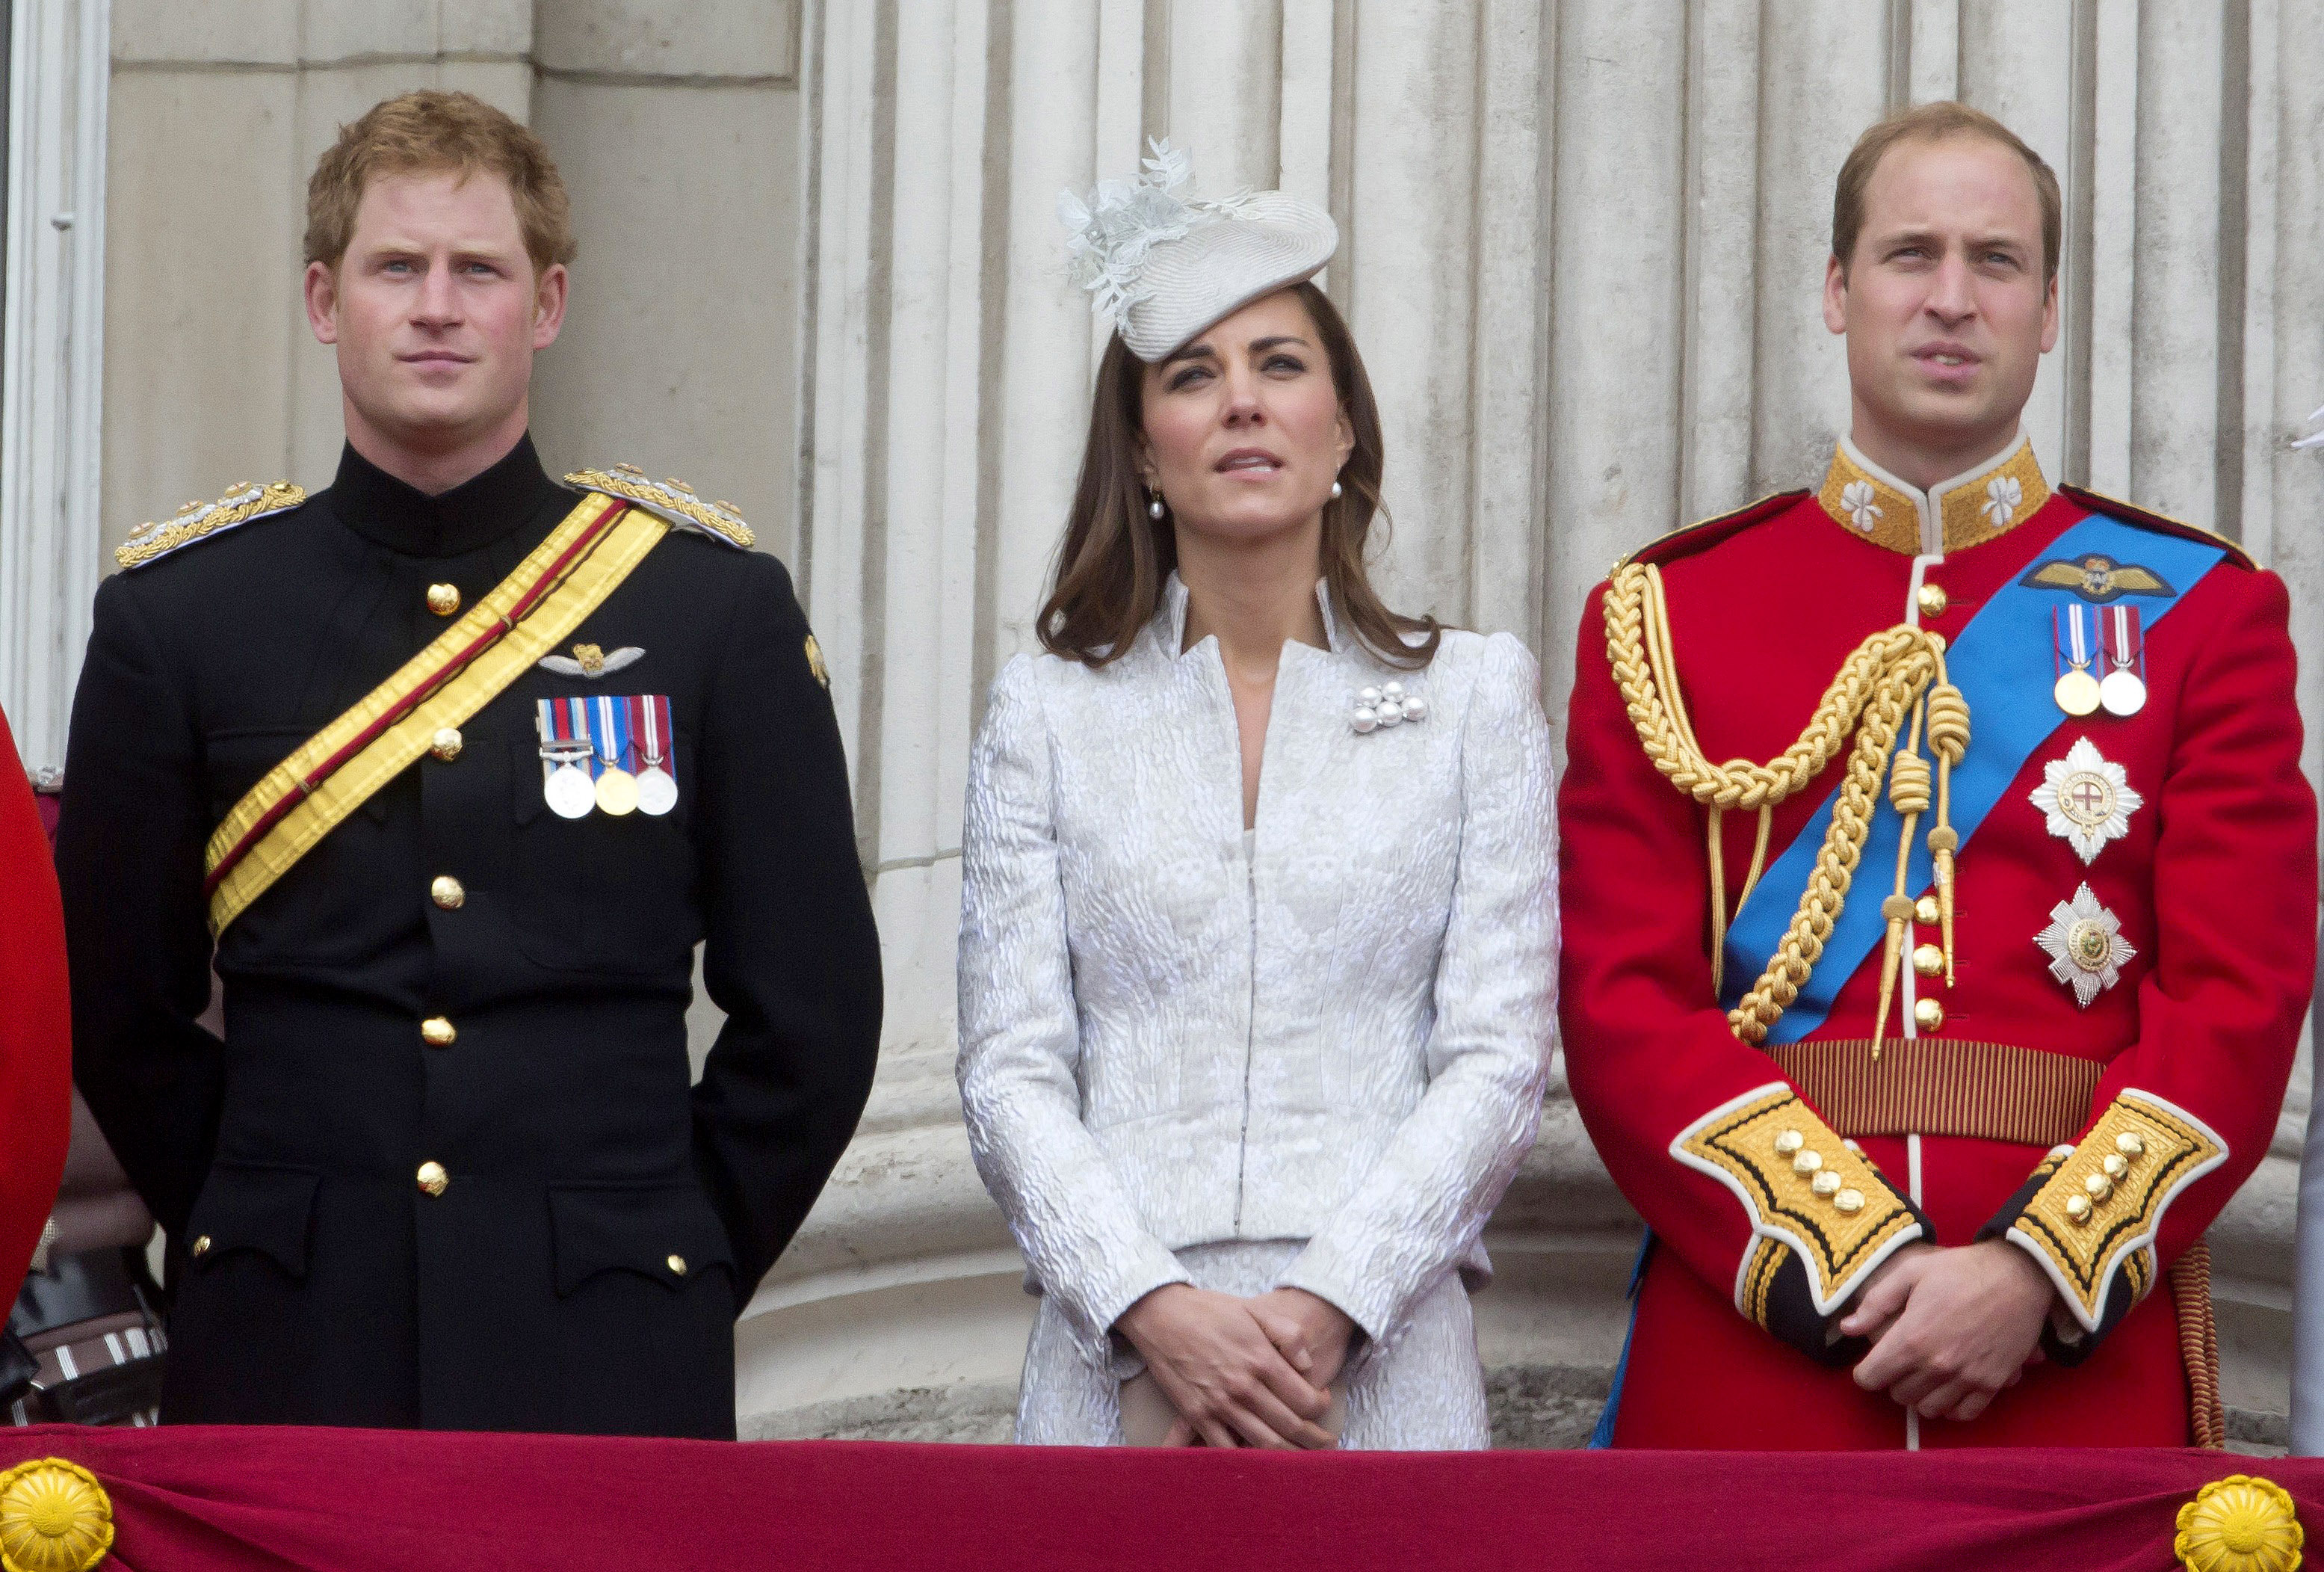 Prince Harry, Catherine Duchess of Cambridge and Prince William Duke of Cambridge stand on the balcony during Trooping the Colour at The Royal Horseguards on June 14, 2014 in London, England. (Julian Parker—UK Press via Getty Images)